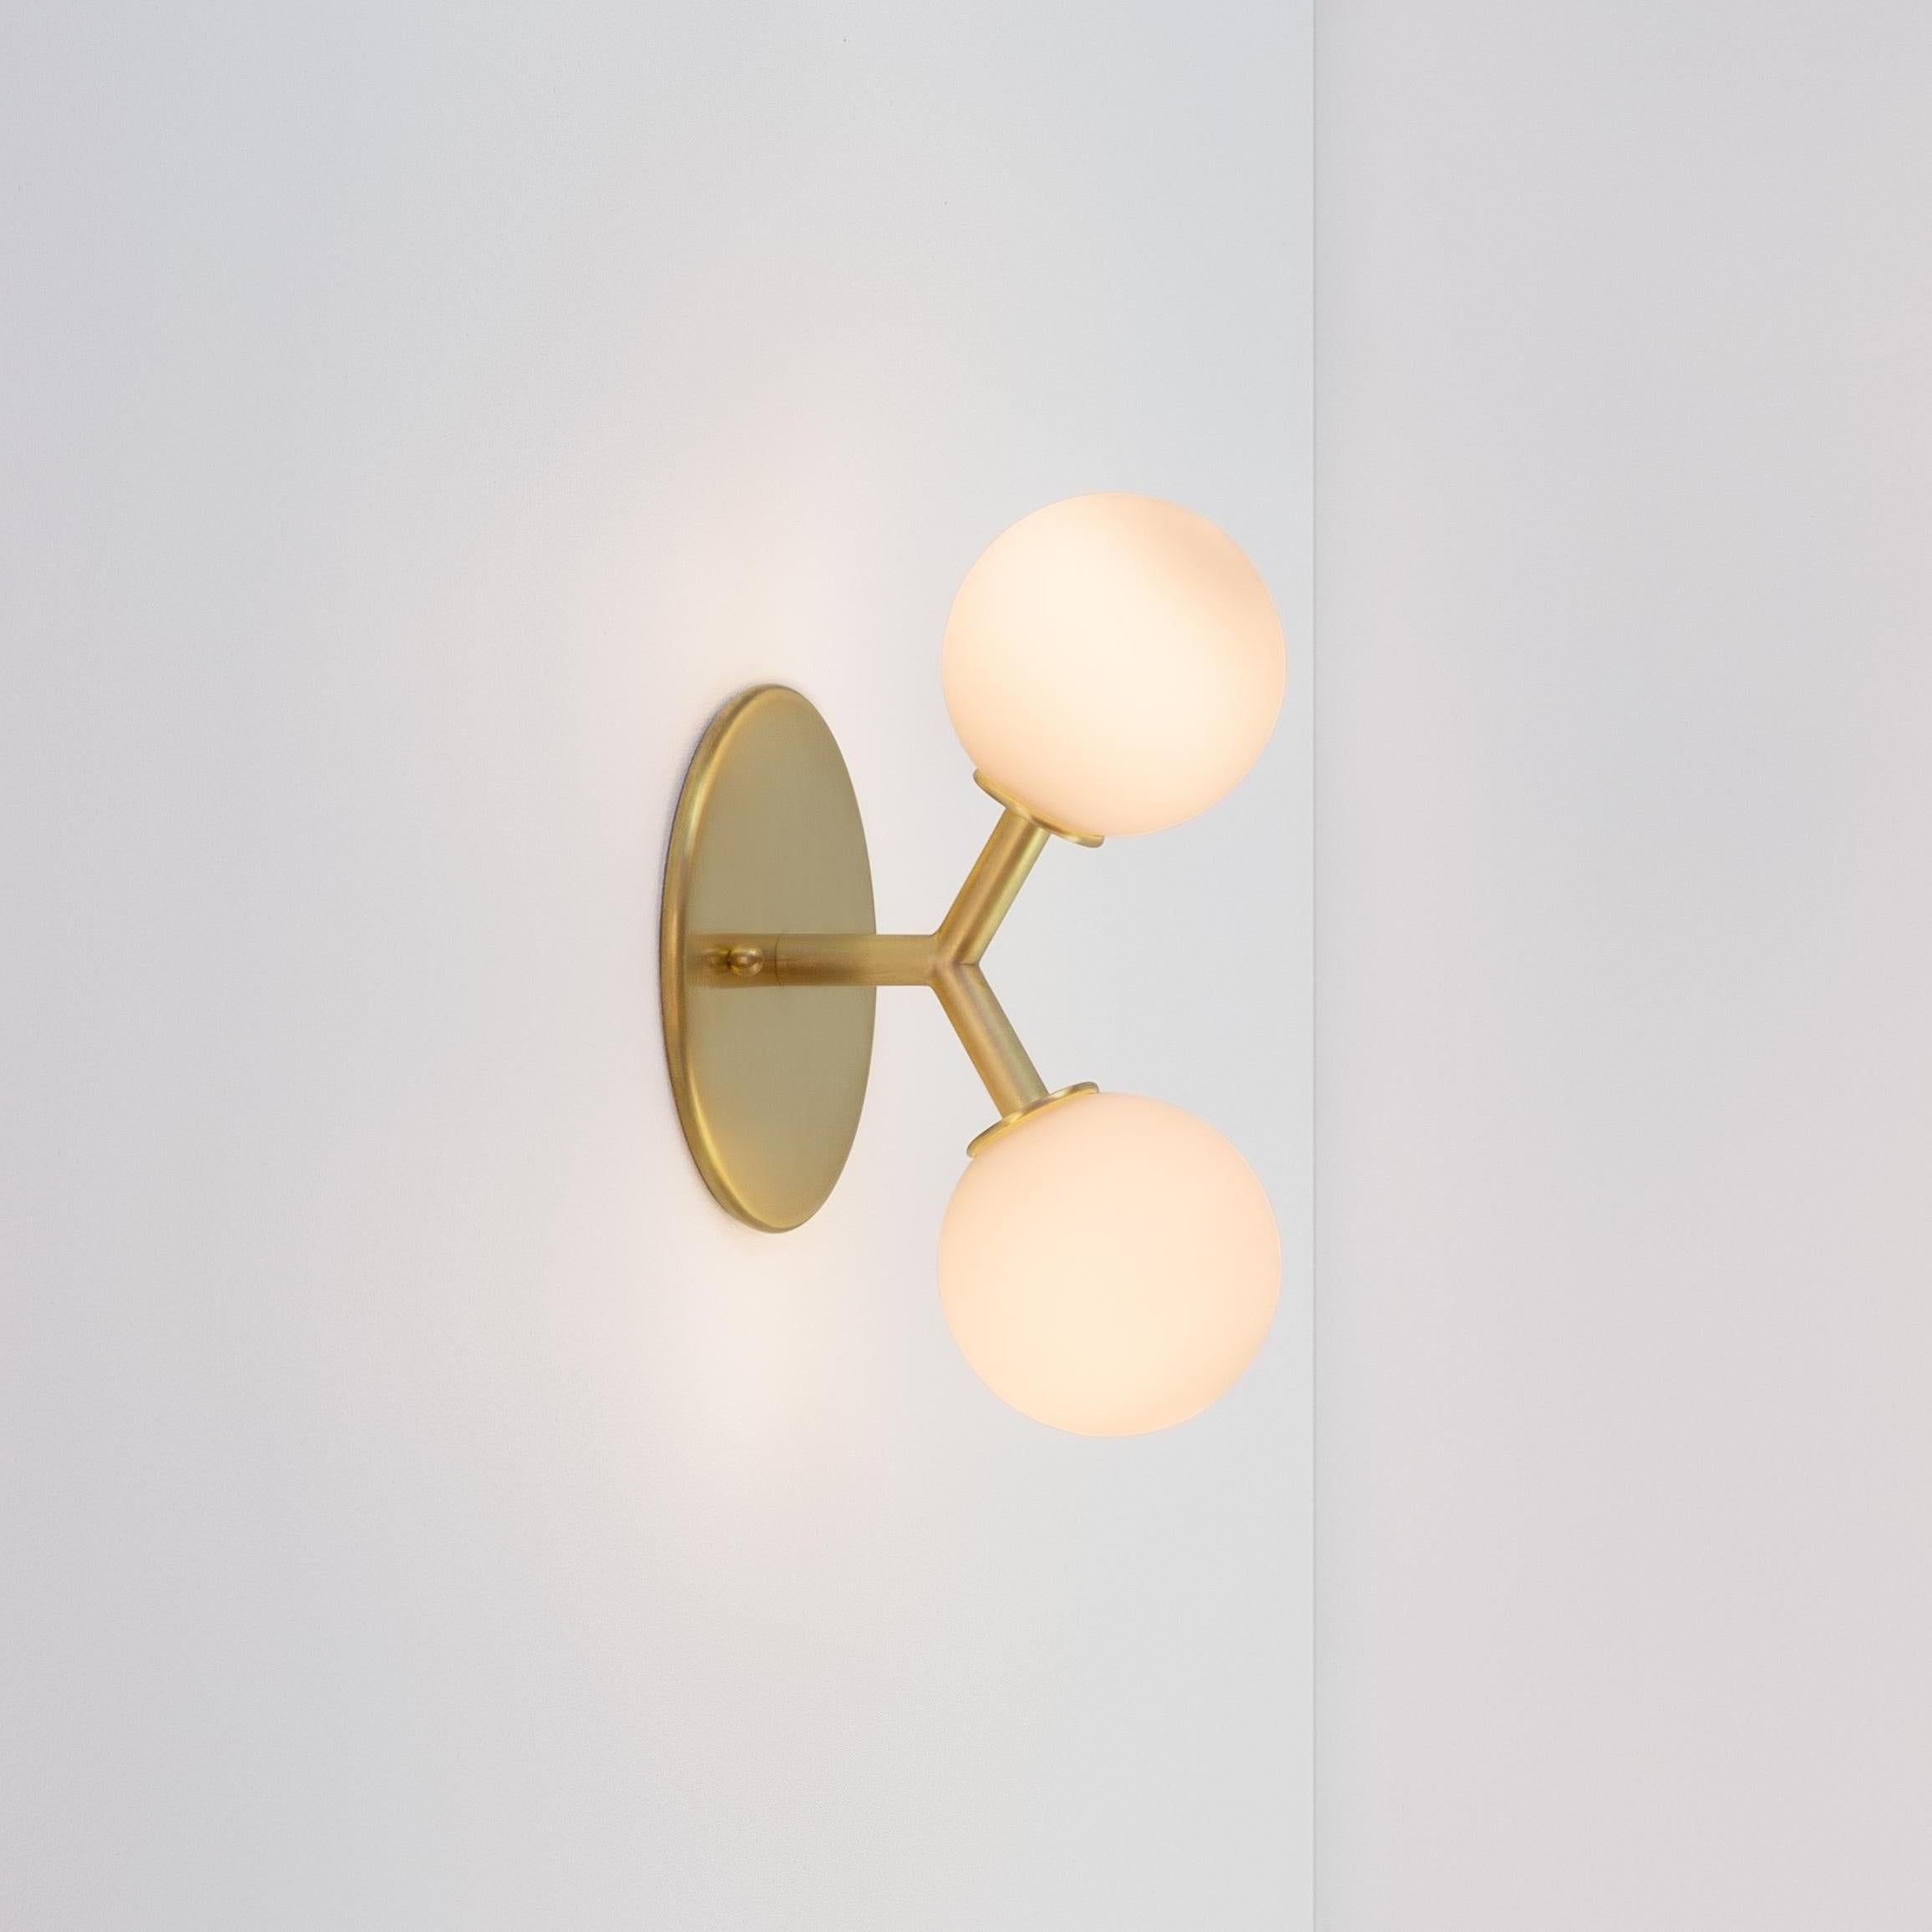 This listing is for 4x Y flush mount in brass designed and manufactured by Research Lighting.

Materials: Brass & glass
Finish: Raw brushed brass 
Electronics (per fixture): 2x G9 Sockets, 2x 2.5 Watt LED Bulbs (included), 500 Lumens total (per